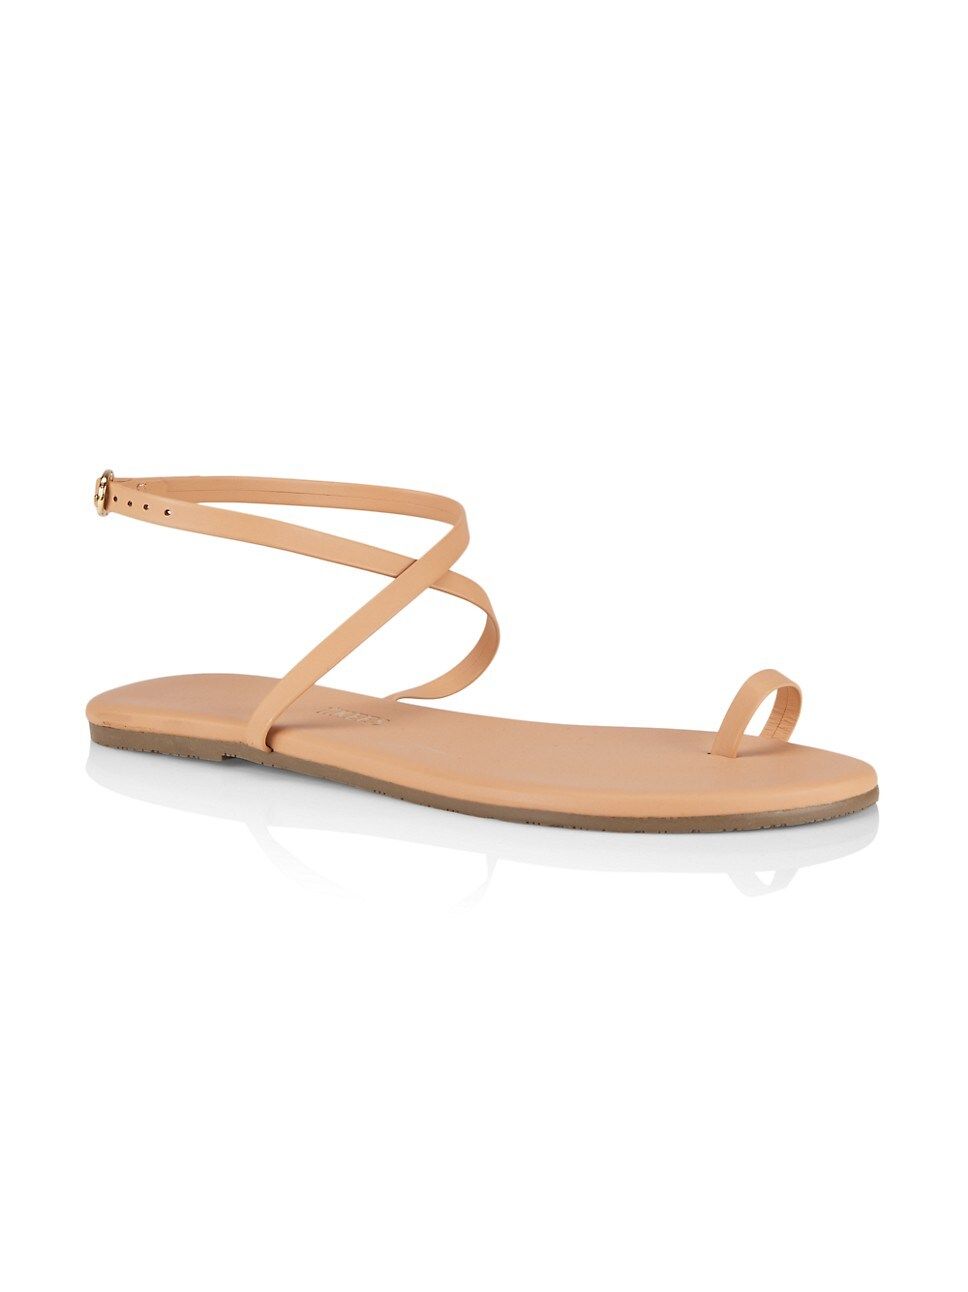 Phoebe Leather Ankle-Strap Sandals | Saks Fifth Avenue